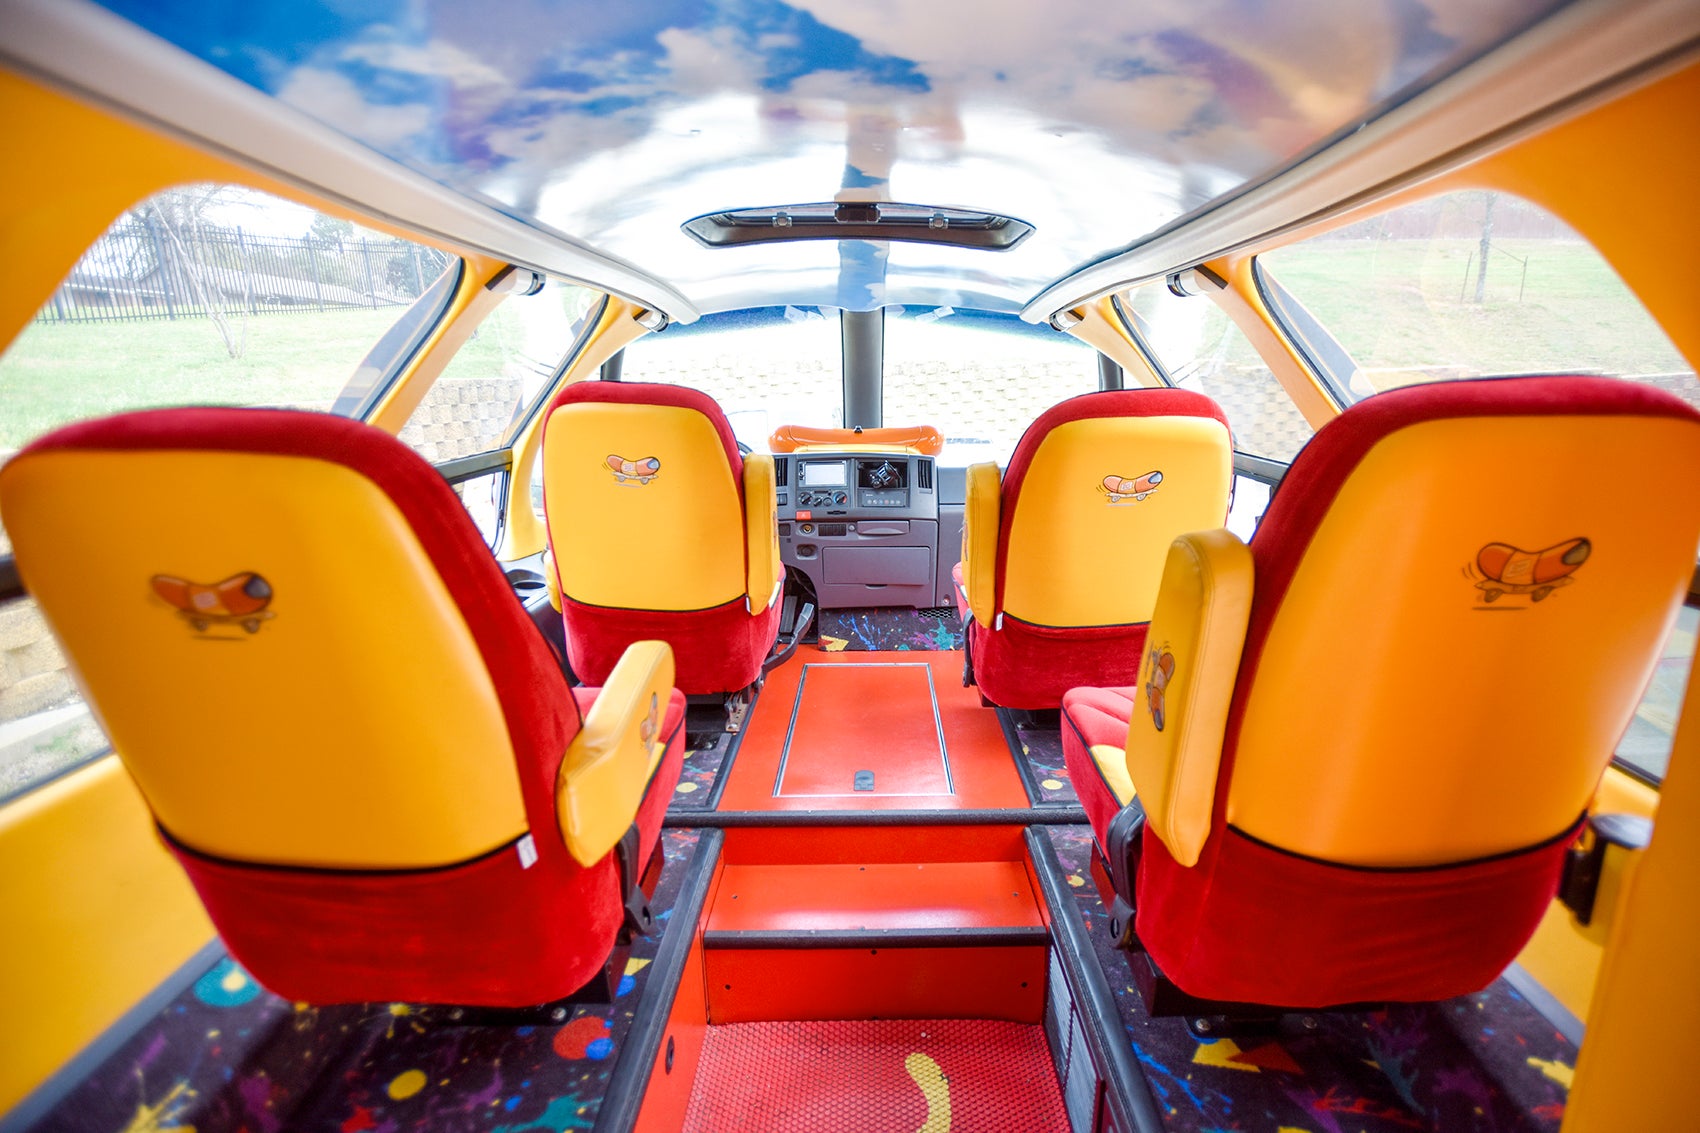 Inspiring: People Are Boning In The Wienermobile